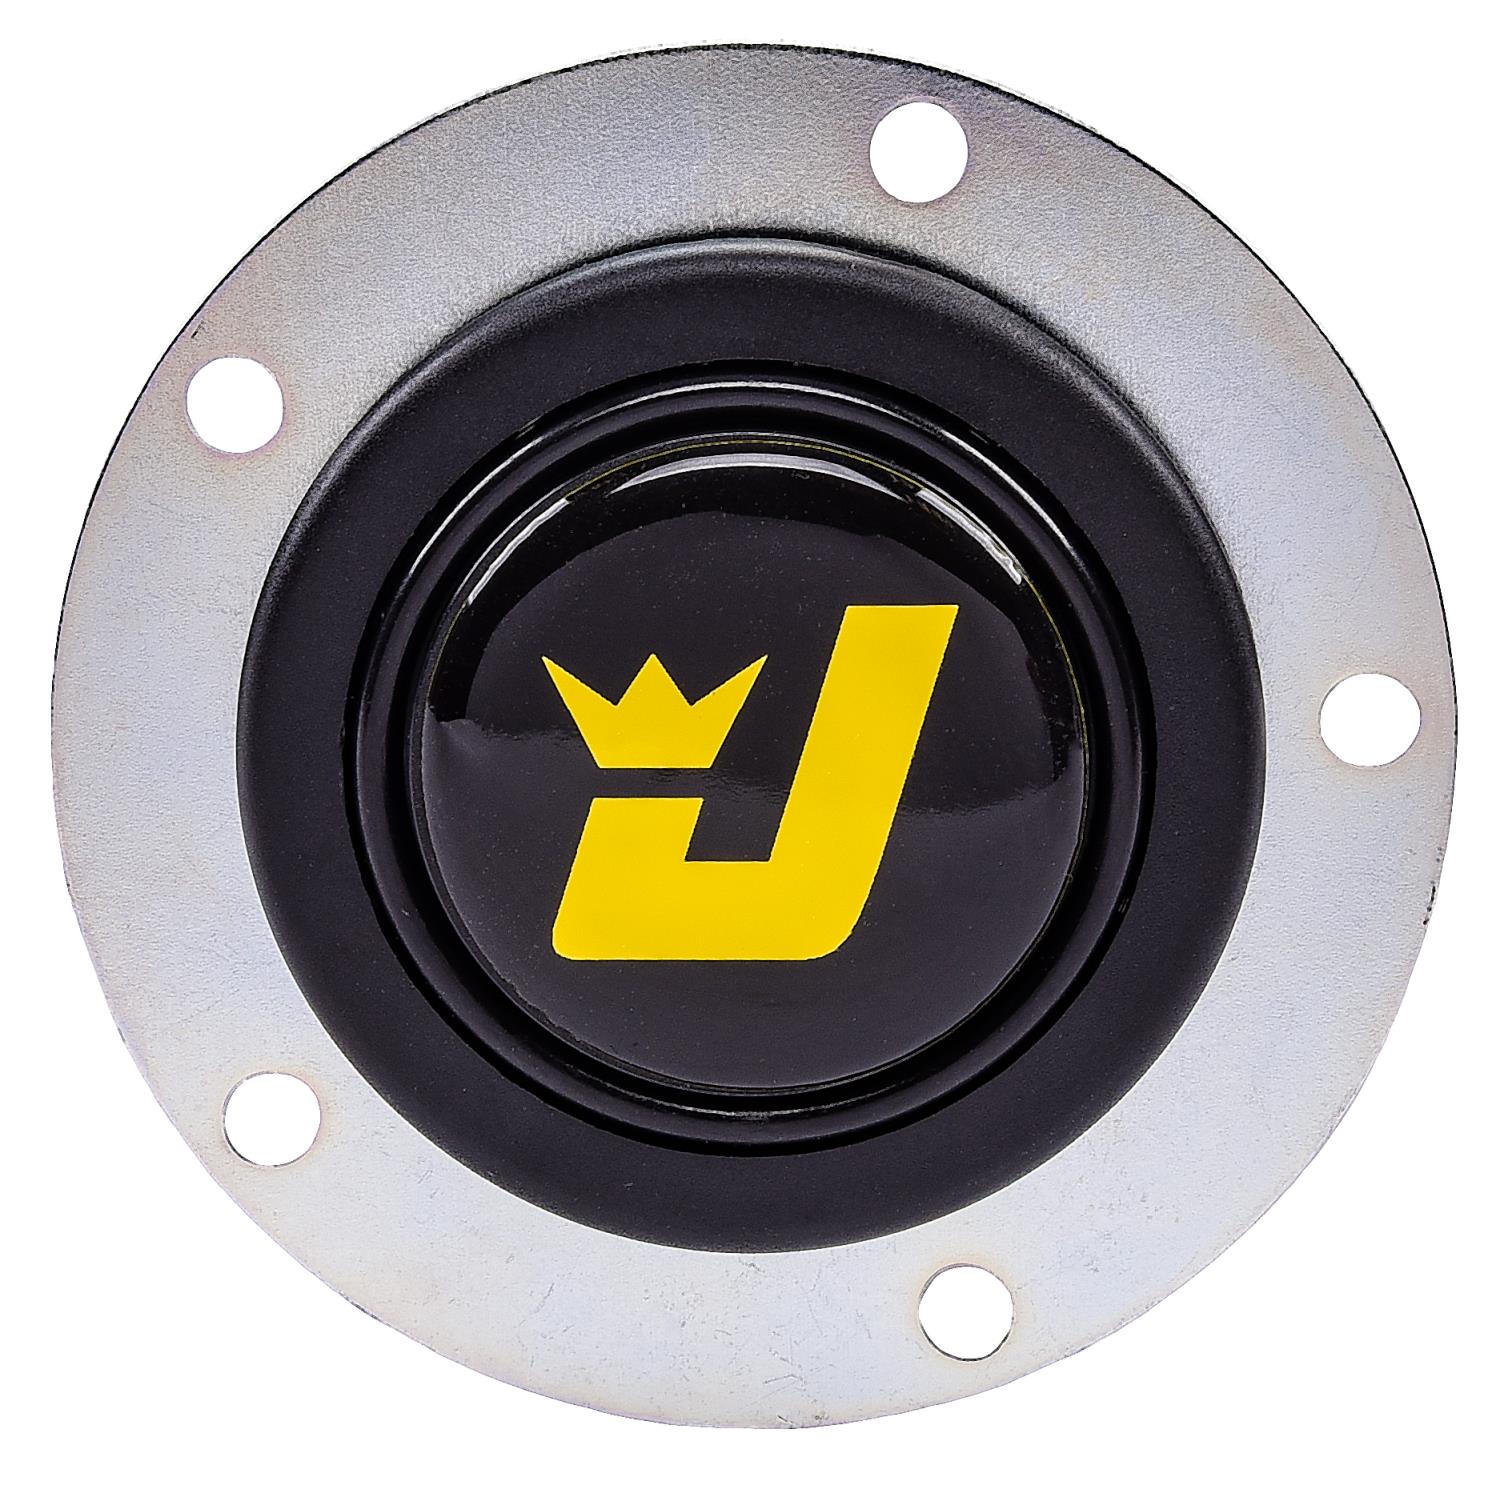 Horn Button Kit for JEGS Premium Racing Steering